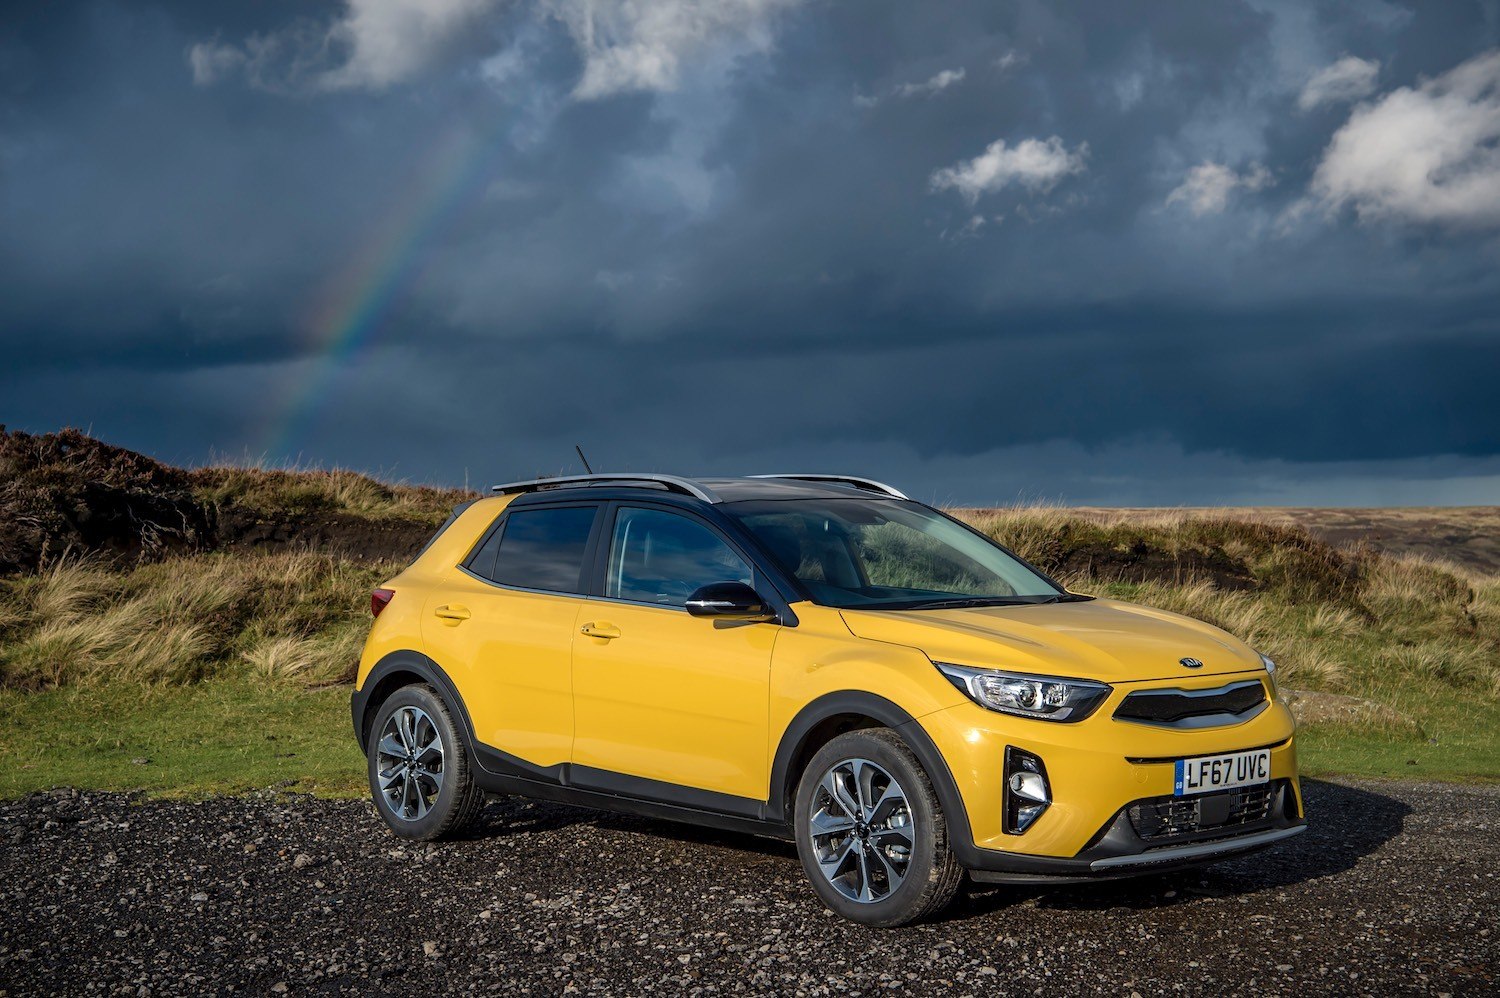 All New Kia Stonic reviewed by Tom Scanlan for Drive 17